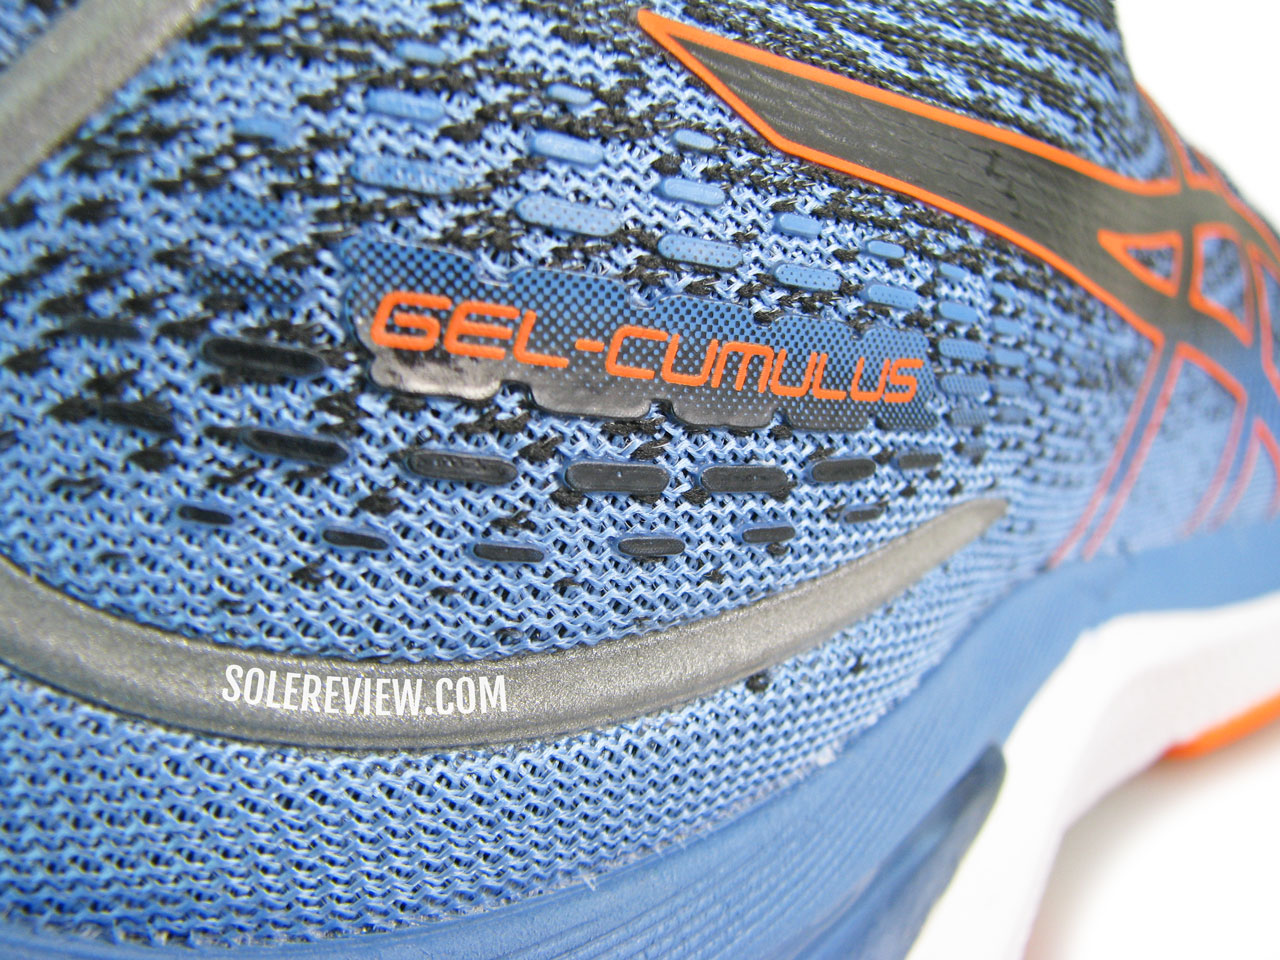 The reflective details on the Asics Cumulus 24.